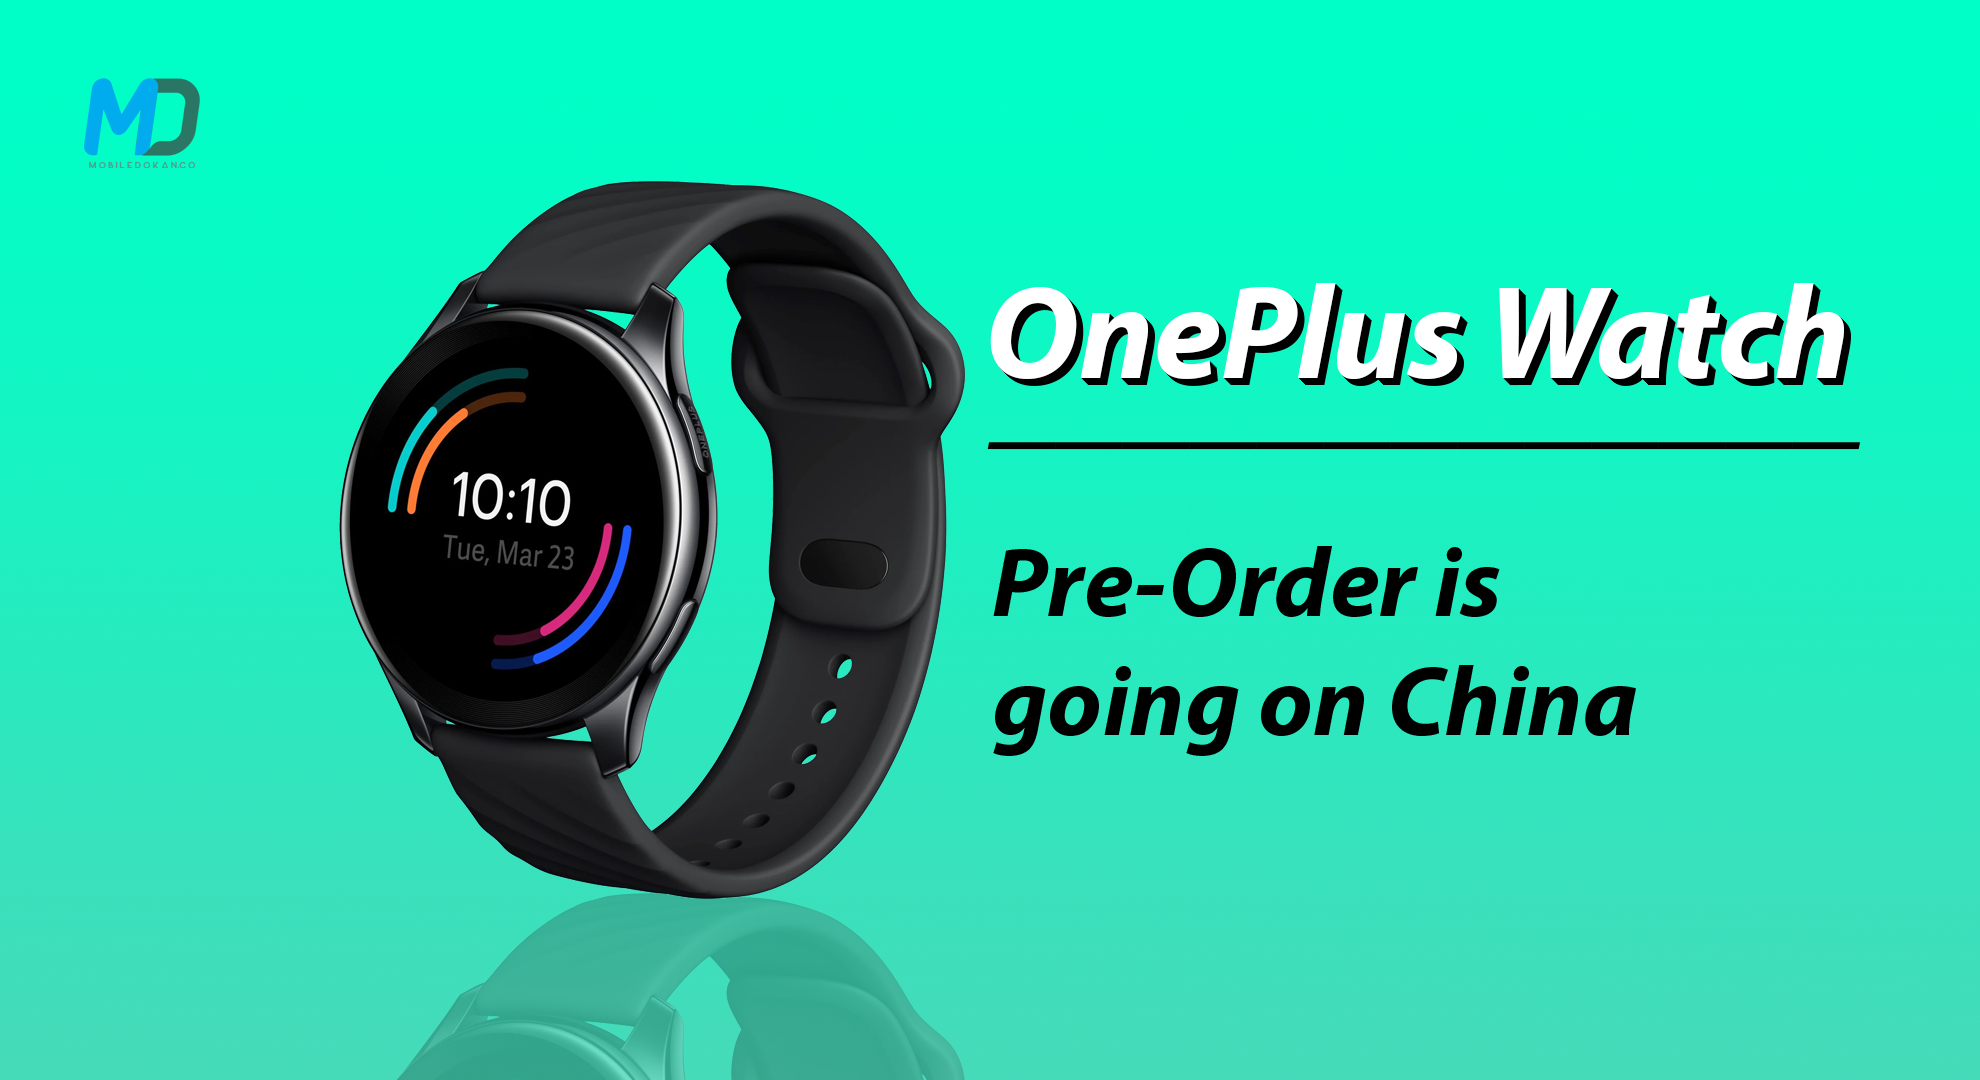 OnePlus Watch pre-order in China is going on before launch